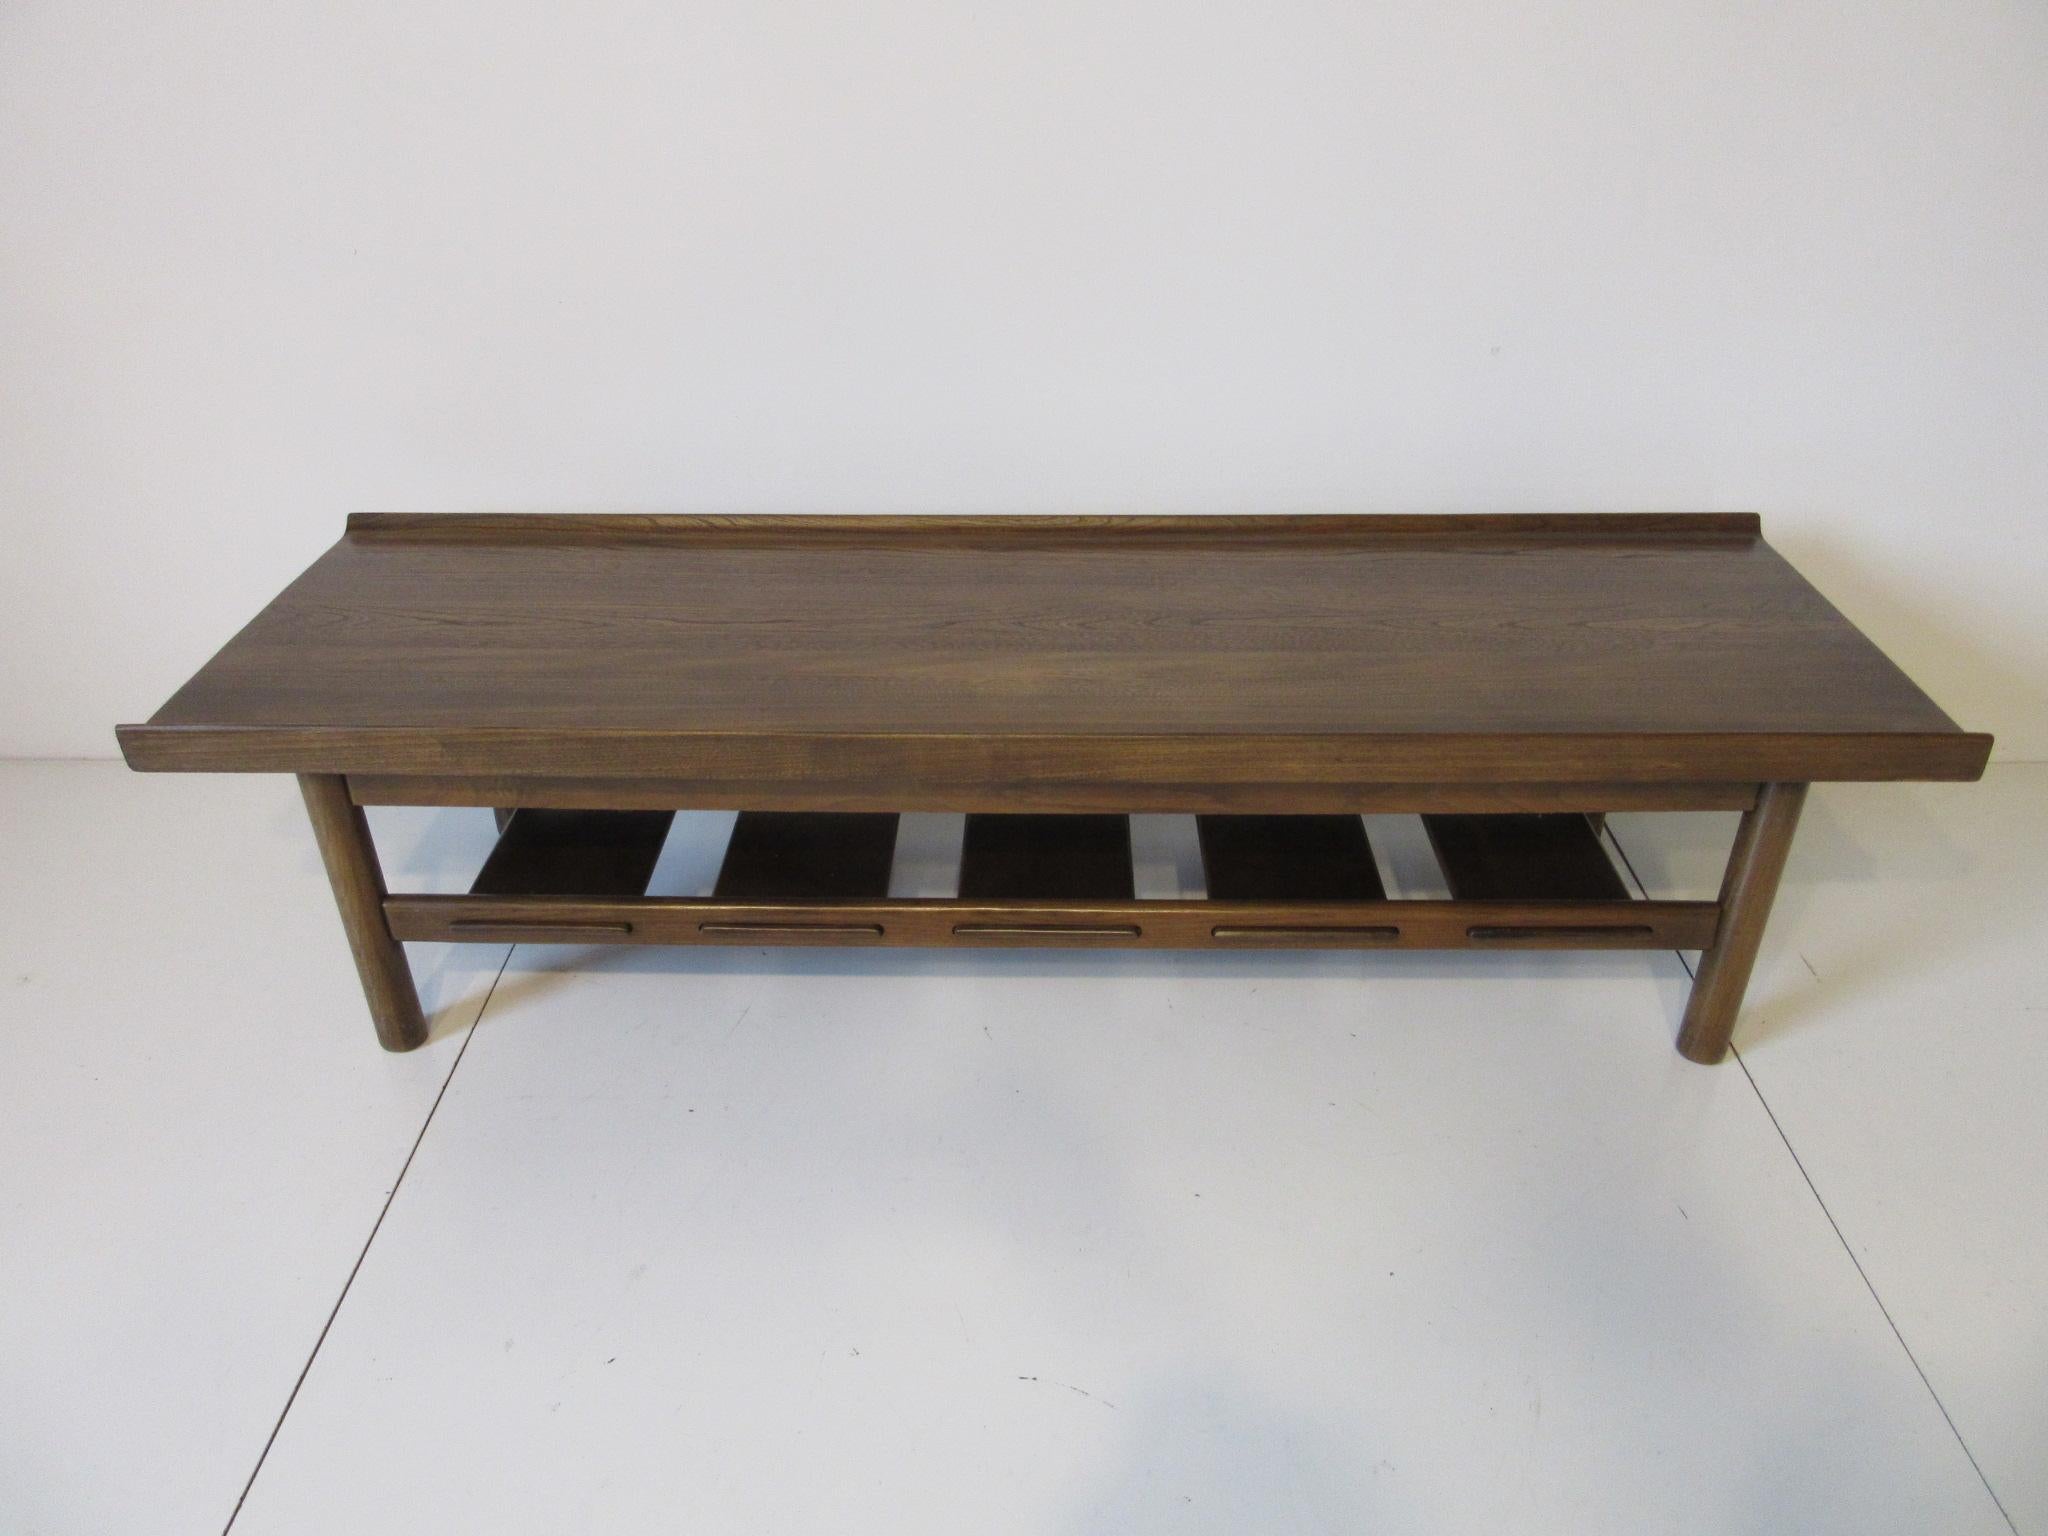 A well crafted solid plank coffee table with raised edges, rounded legs and a lower shelve with wide wood slats . Wonderful natural grain design to the top surface from the days when furniture manufactures had use of the old growth wood . This table